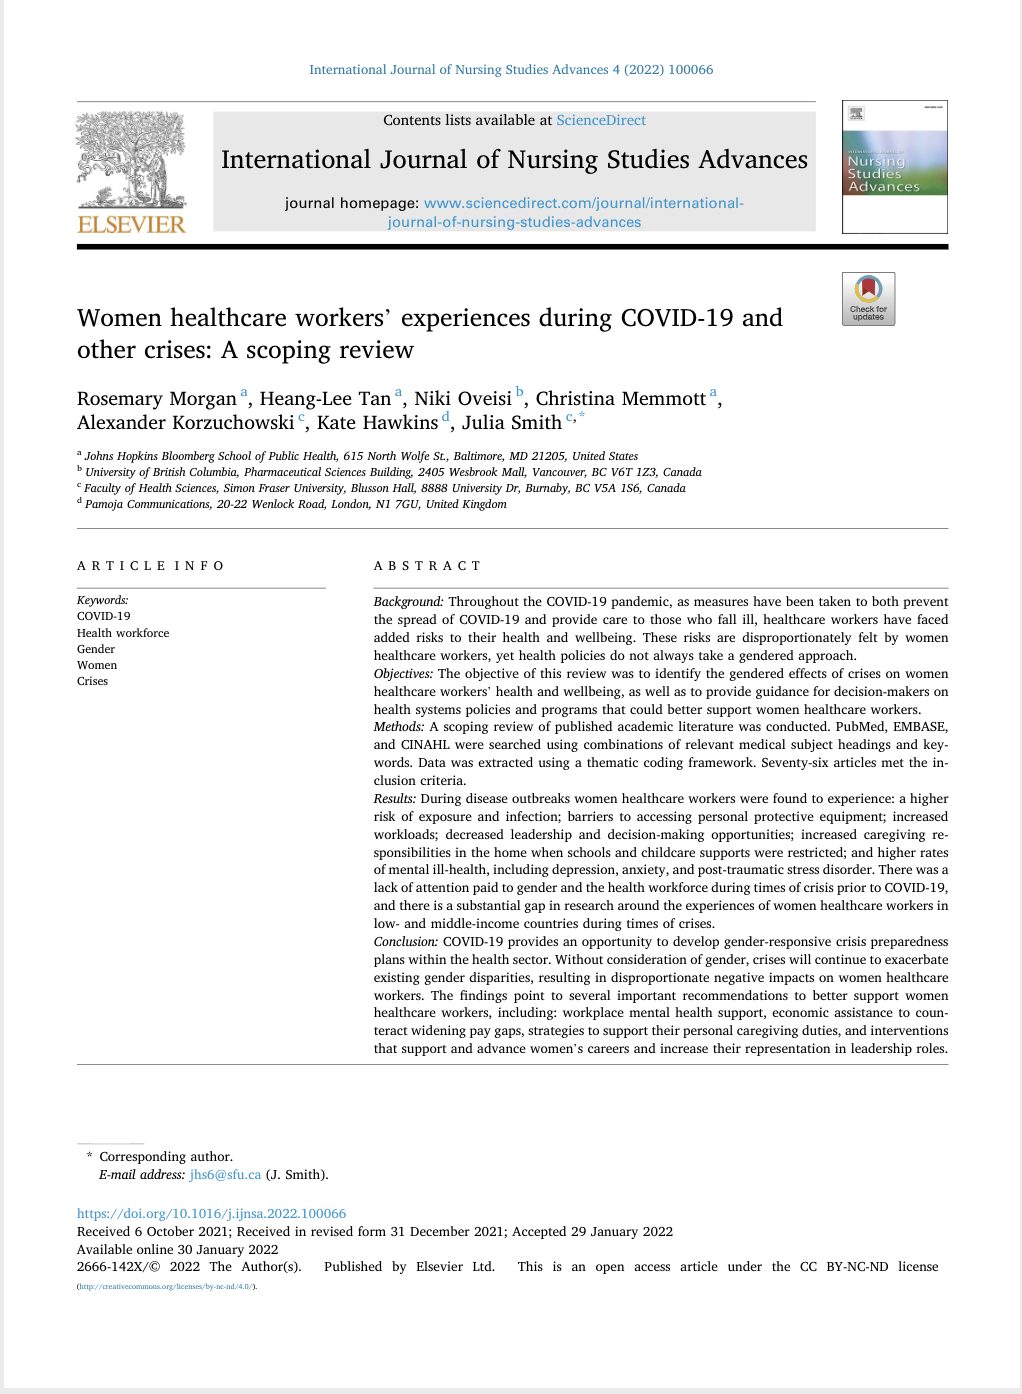 Women healthcare workers’ experiences during COVID-19 and other crises: A scoping review